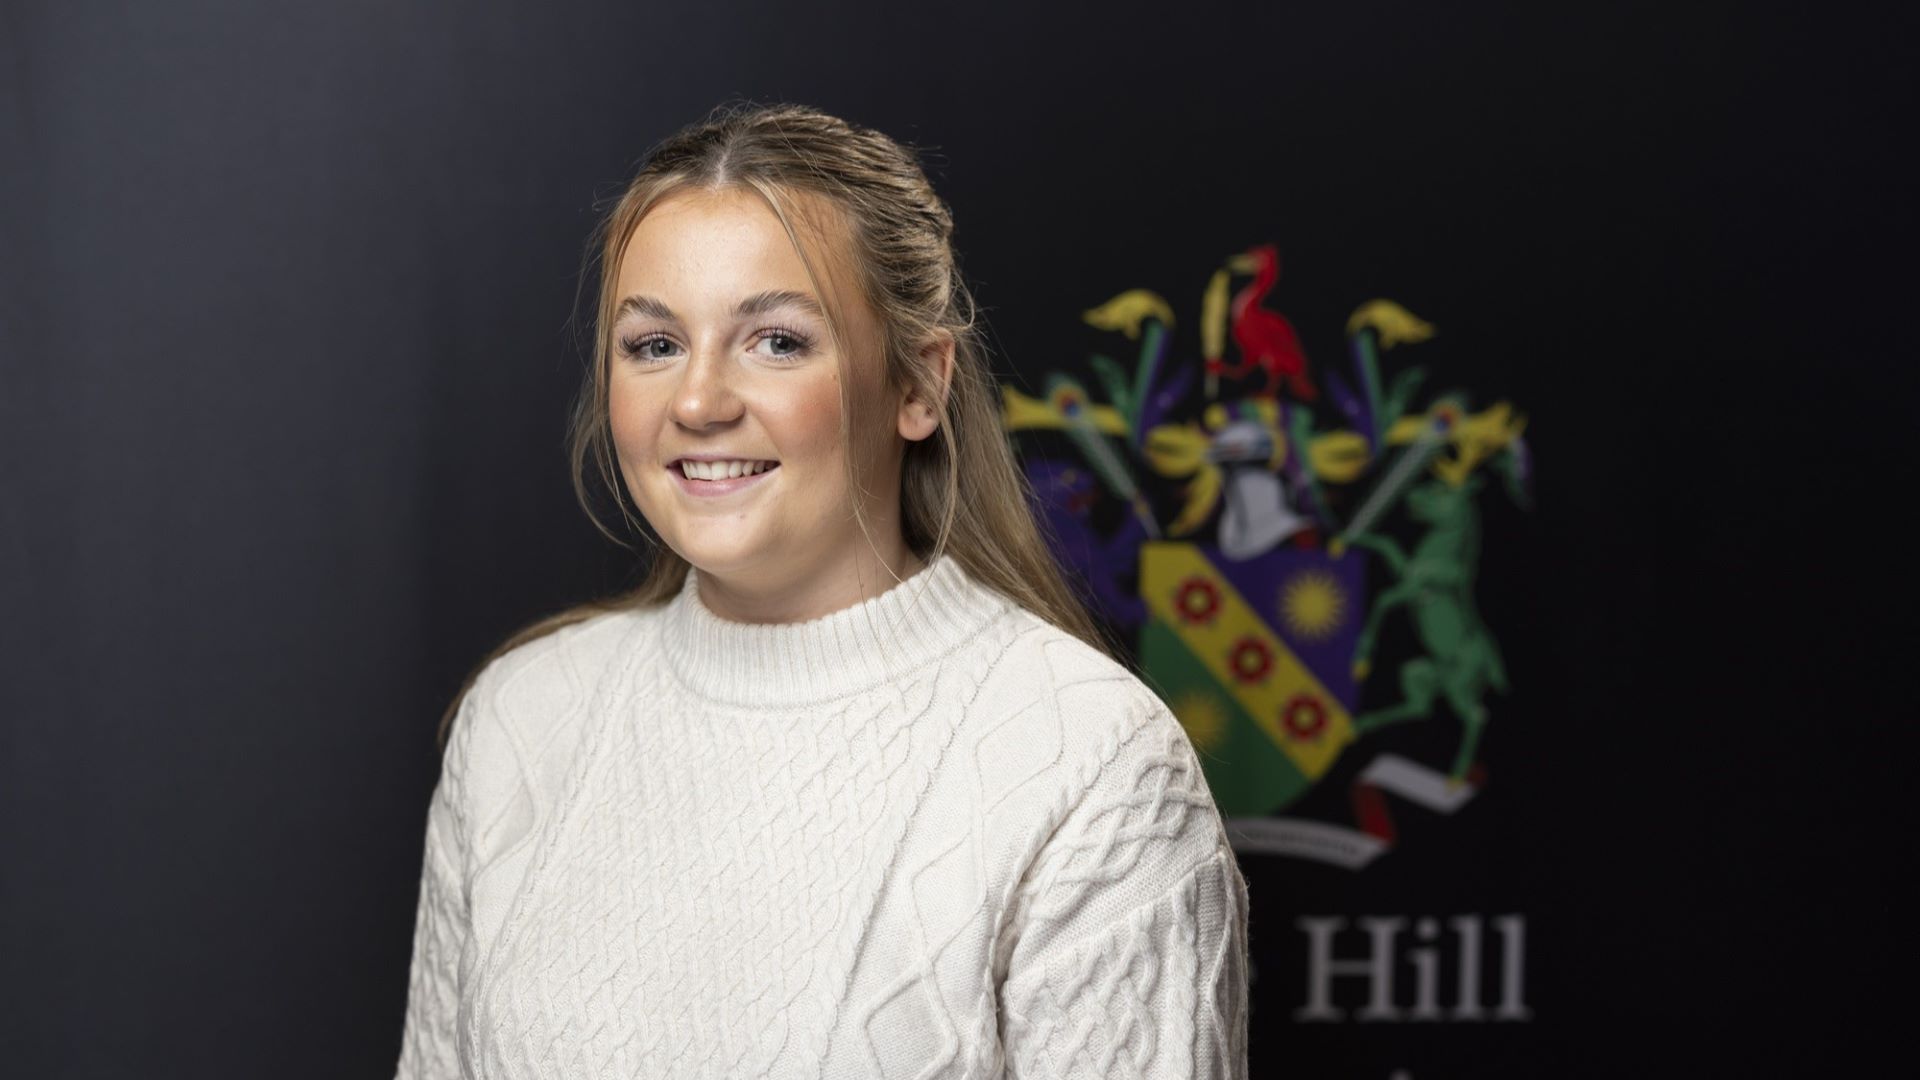 Student Grace Arrowsmith smiles at the camera while standing in front of the Edge Hill University crest